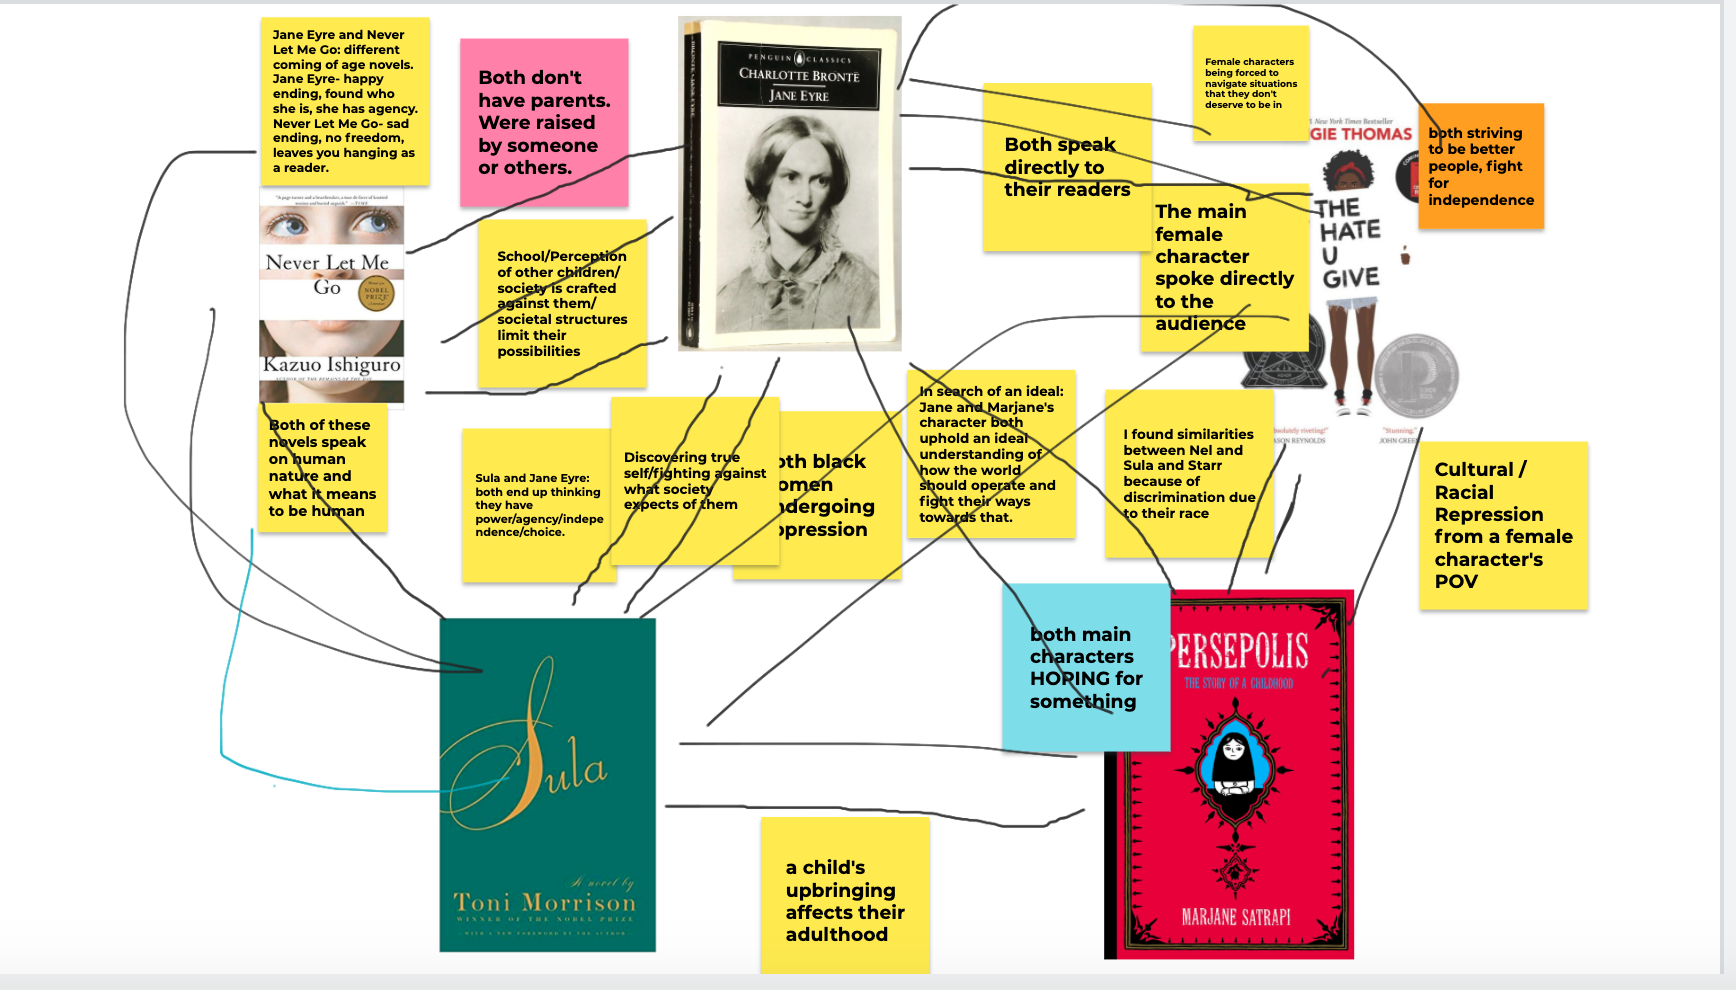 Fig. 1. Screenshot of Jam from final Fall 2020 class session on The Novel. Jam contains images of the covers of five novels—Kazuo Ishiguro’s Never Let Me Go (2005), Charlotte Brontë’s Jane Eyre (1847), Toni Morrison’s Sula (1973), Marjane Satrapi’s Persepolis (2000), and Angie Thomas’s The Hate U Give (2017). The Jam also contains yellow, pink, blue, and orange sticky notes with student comments and black and blue lines between the notes and images.